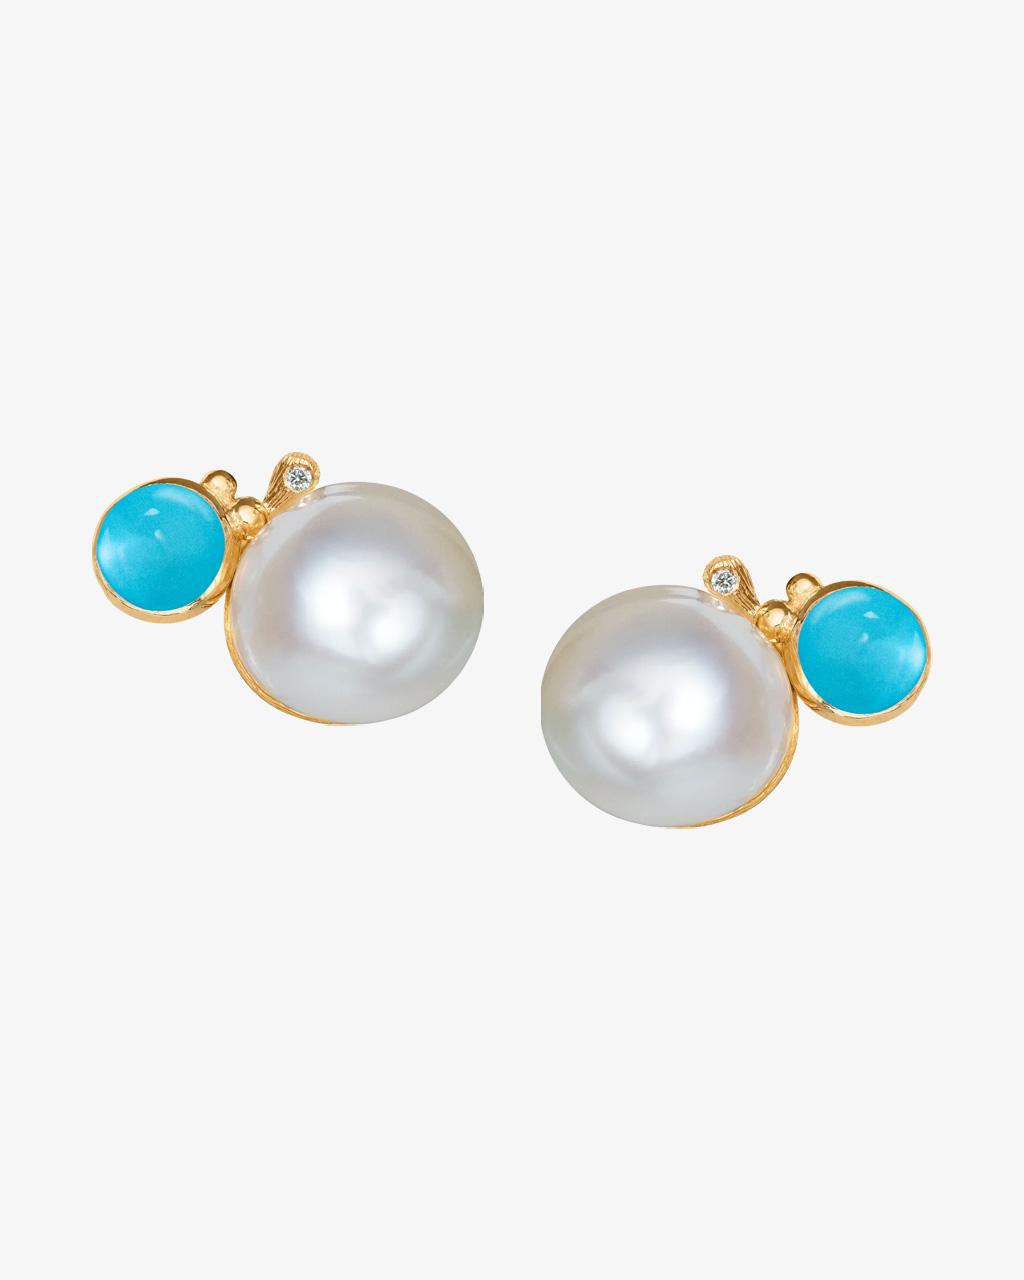 Ole Lynggaard BoHo Pearl Stud Earrings in Gold with Turquoise and Diamonds